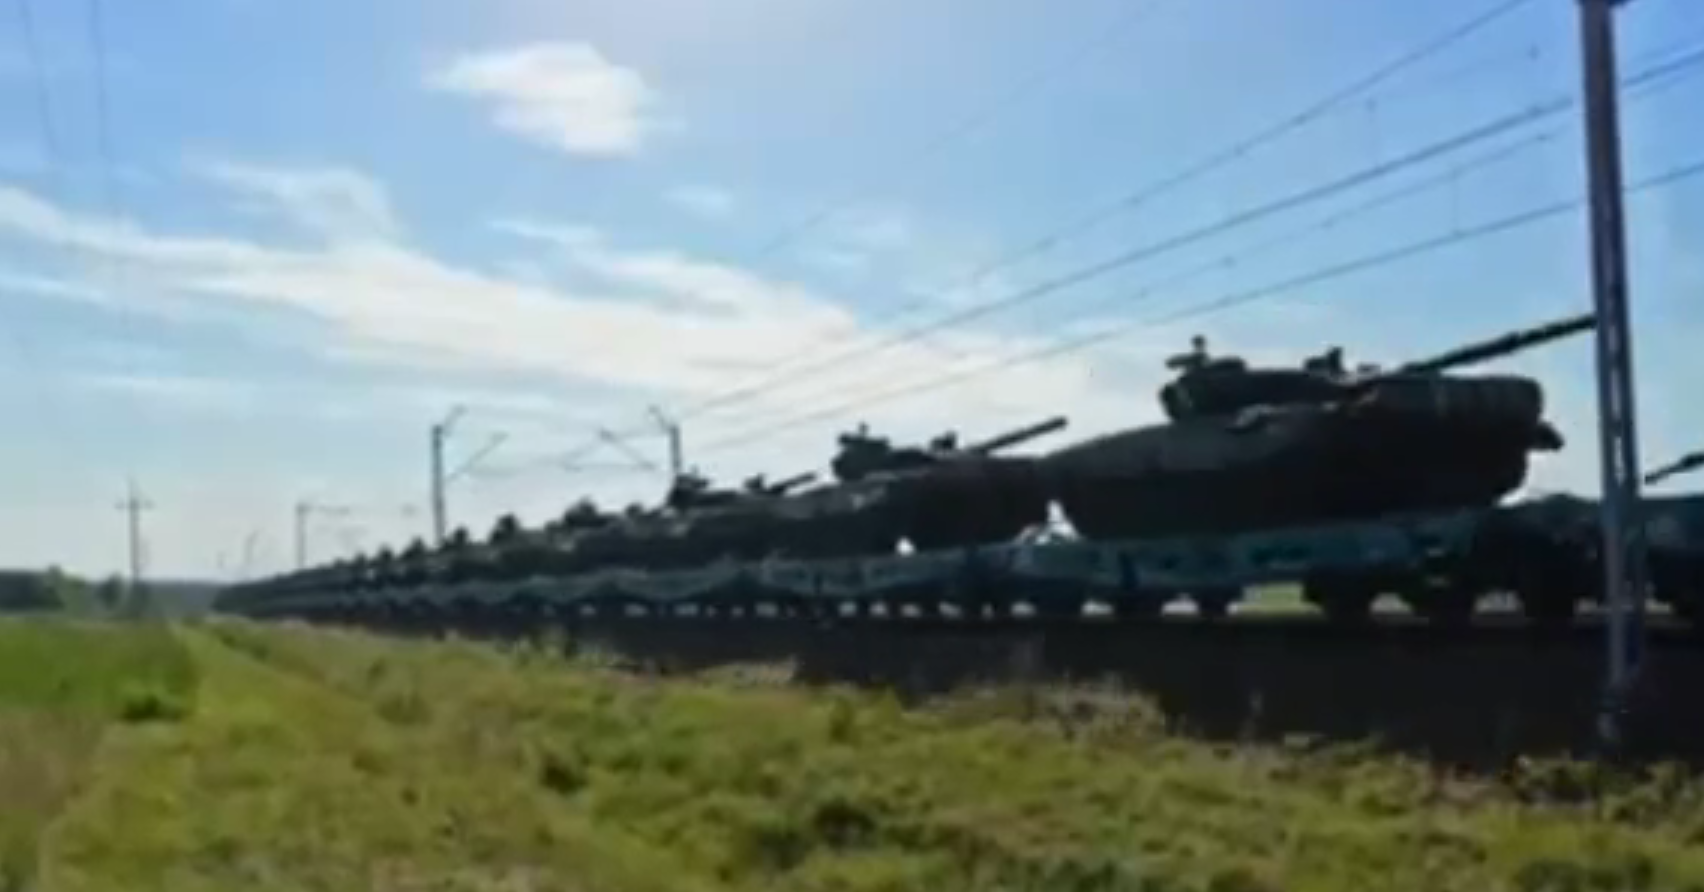 An echelon of PT-91 Twardy tanks was spotted in Poland moving towards the Ukrainian border